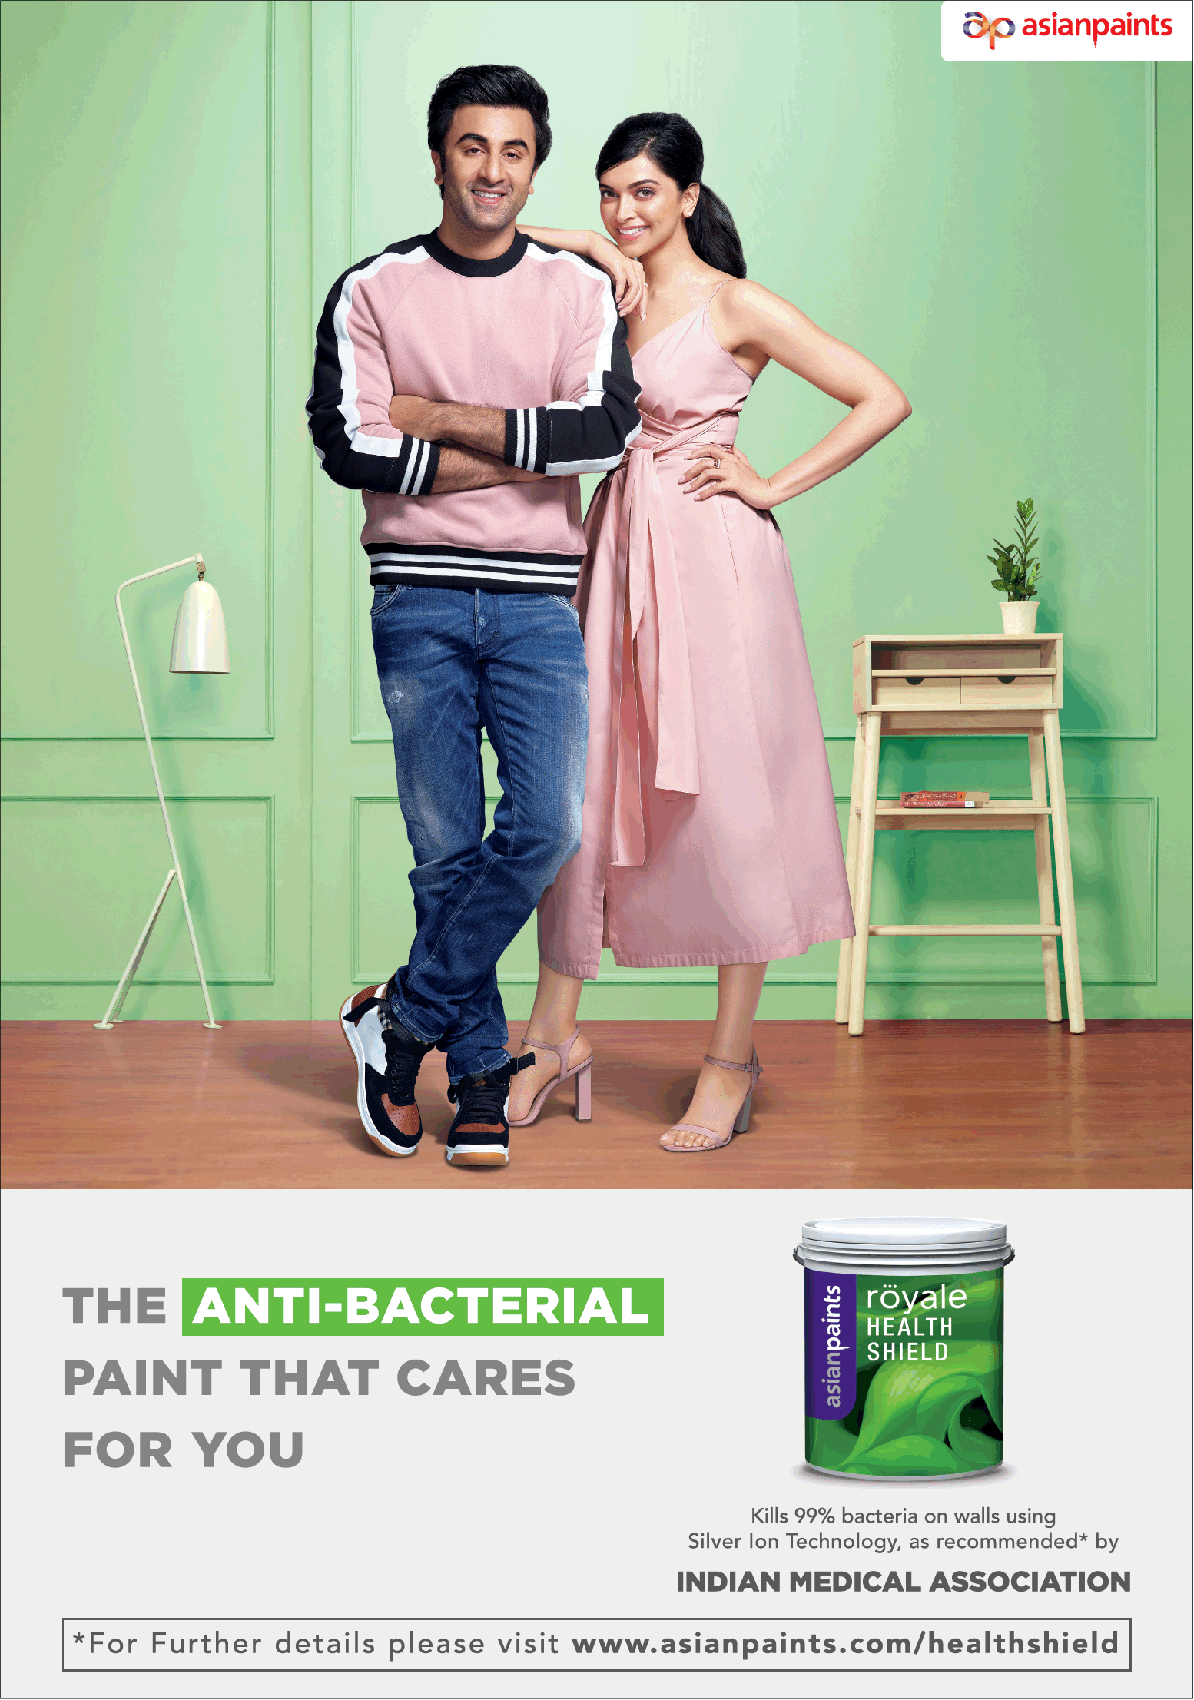 asian-paints-the-anti-bacterial-paint-that-cares-for-you-ad-times-of-india-bangalore-30-03-2019.png